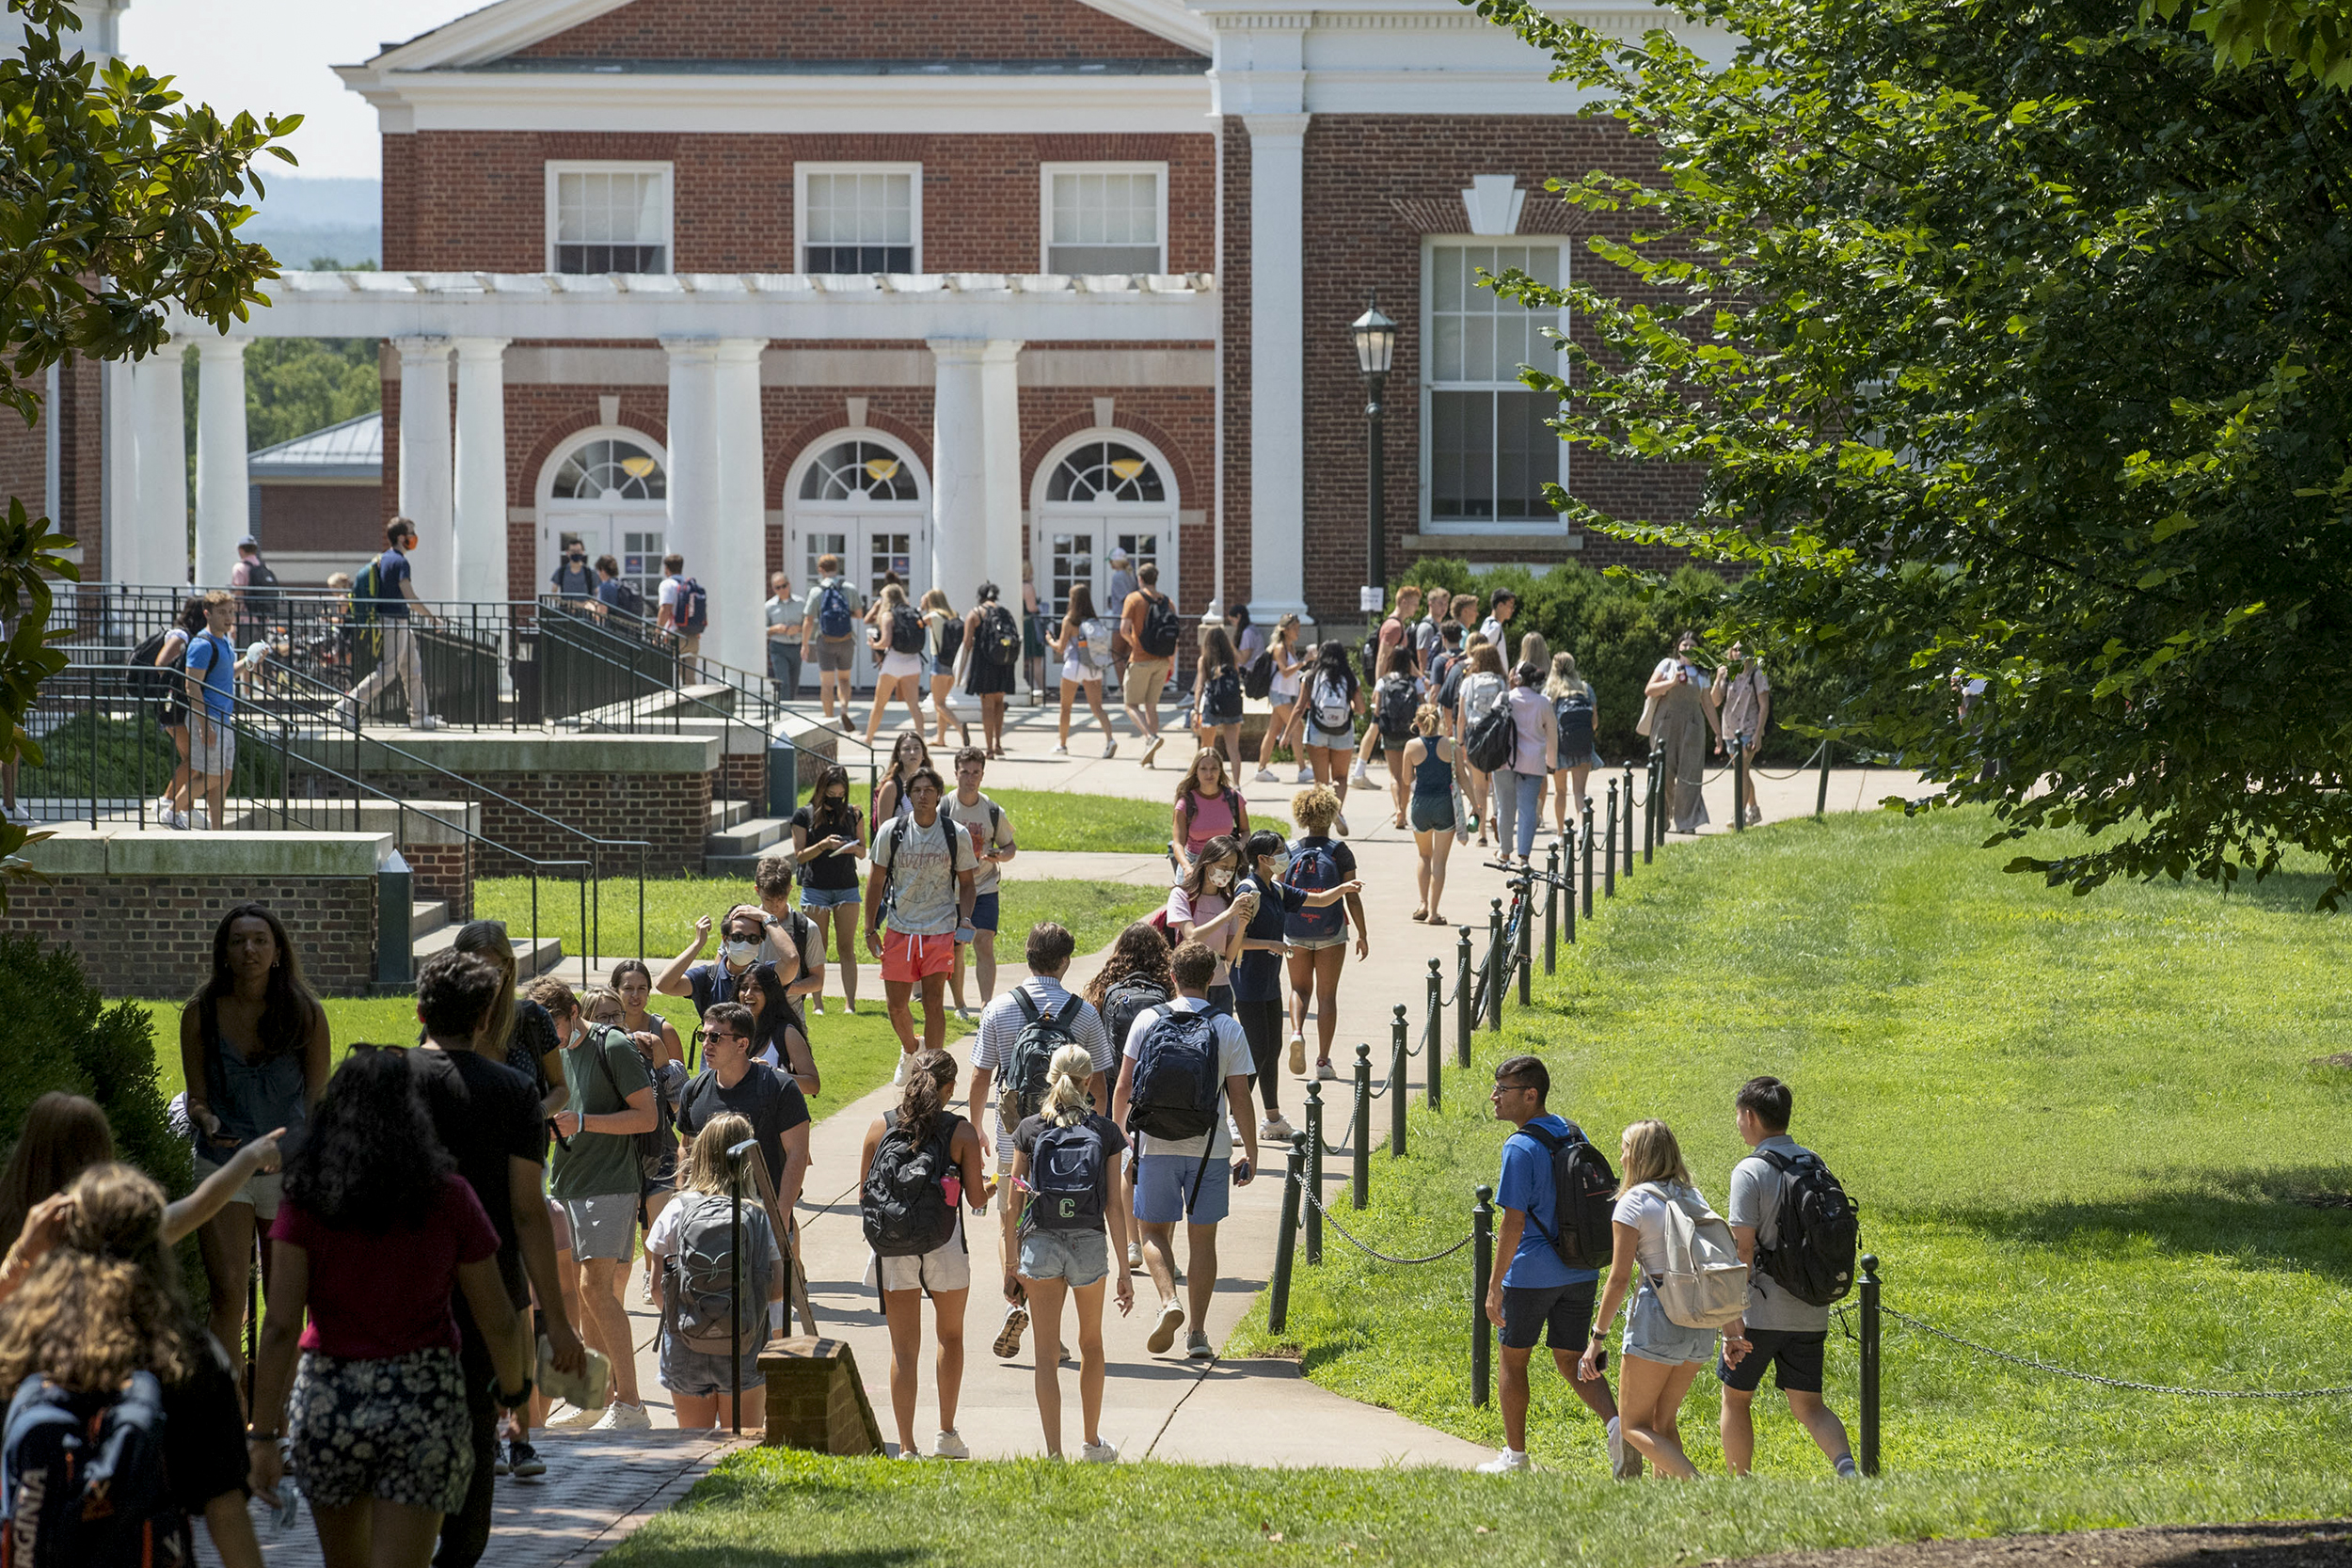 Students walking on a sidewalk to and from classes